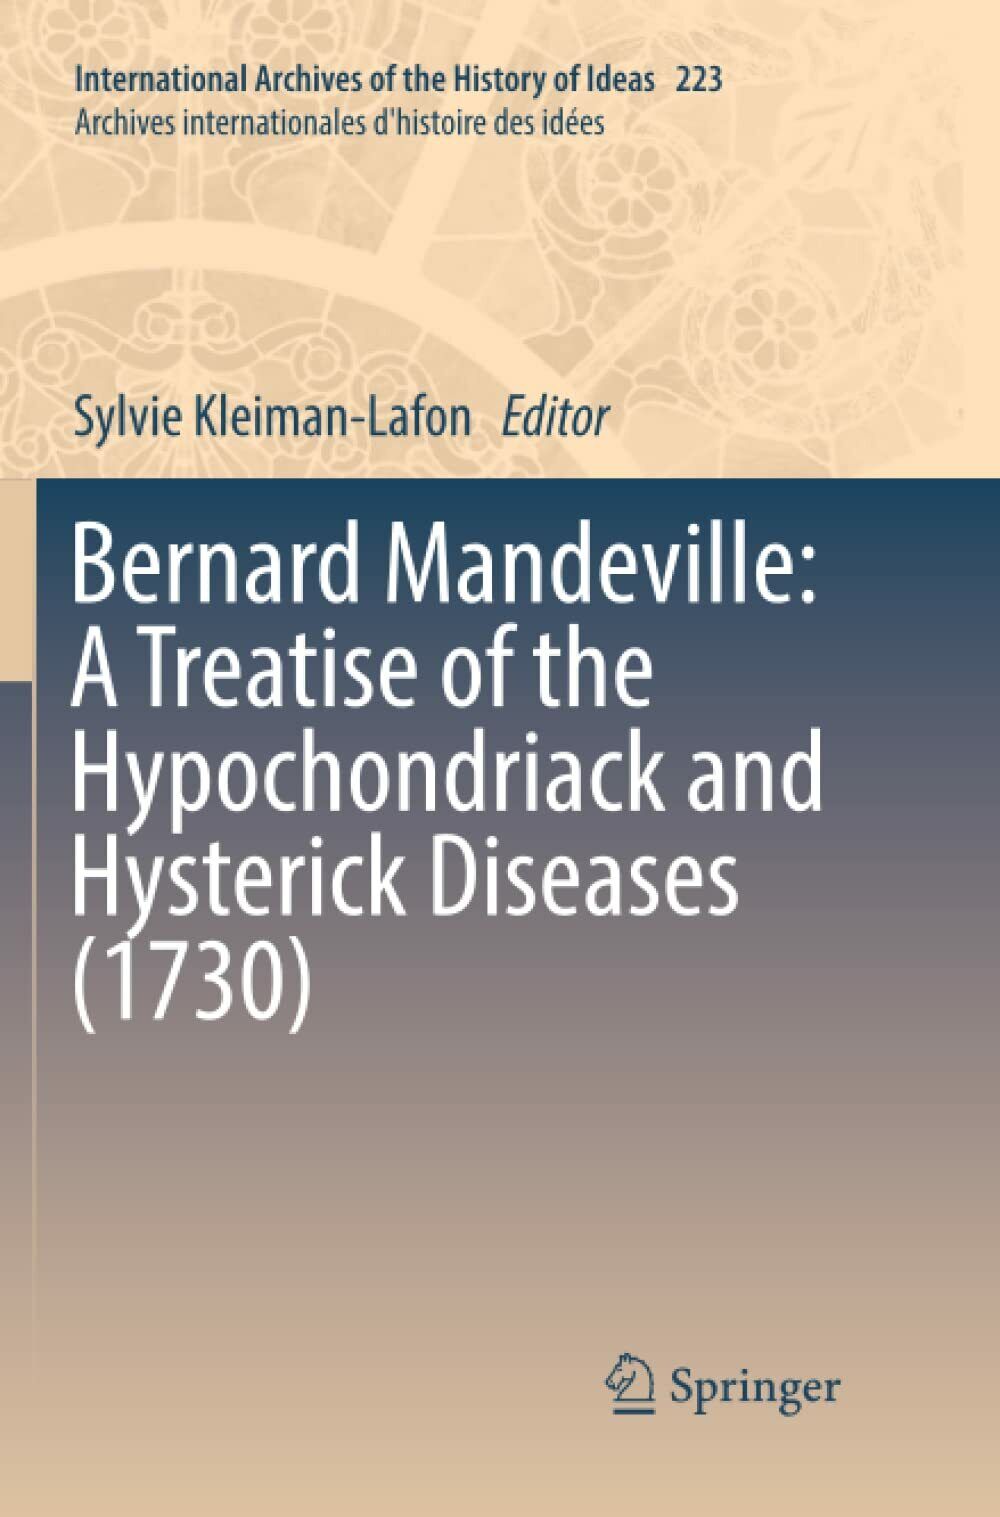 Bernard Mandeville: A Treatise of the Hypochondriack and Hysterick Diseases 1730